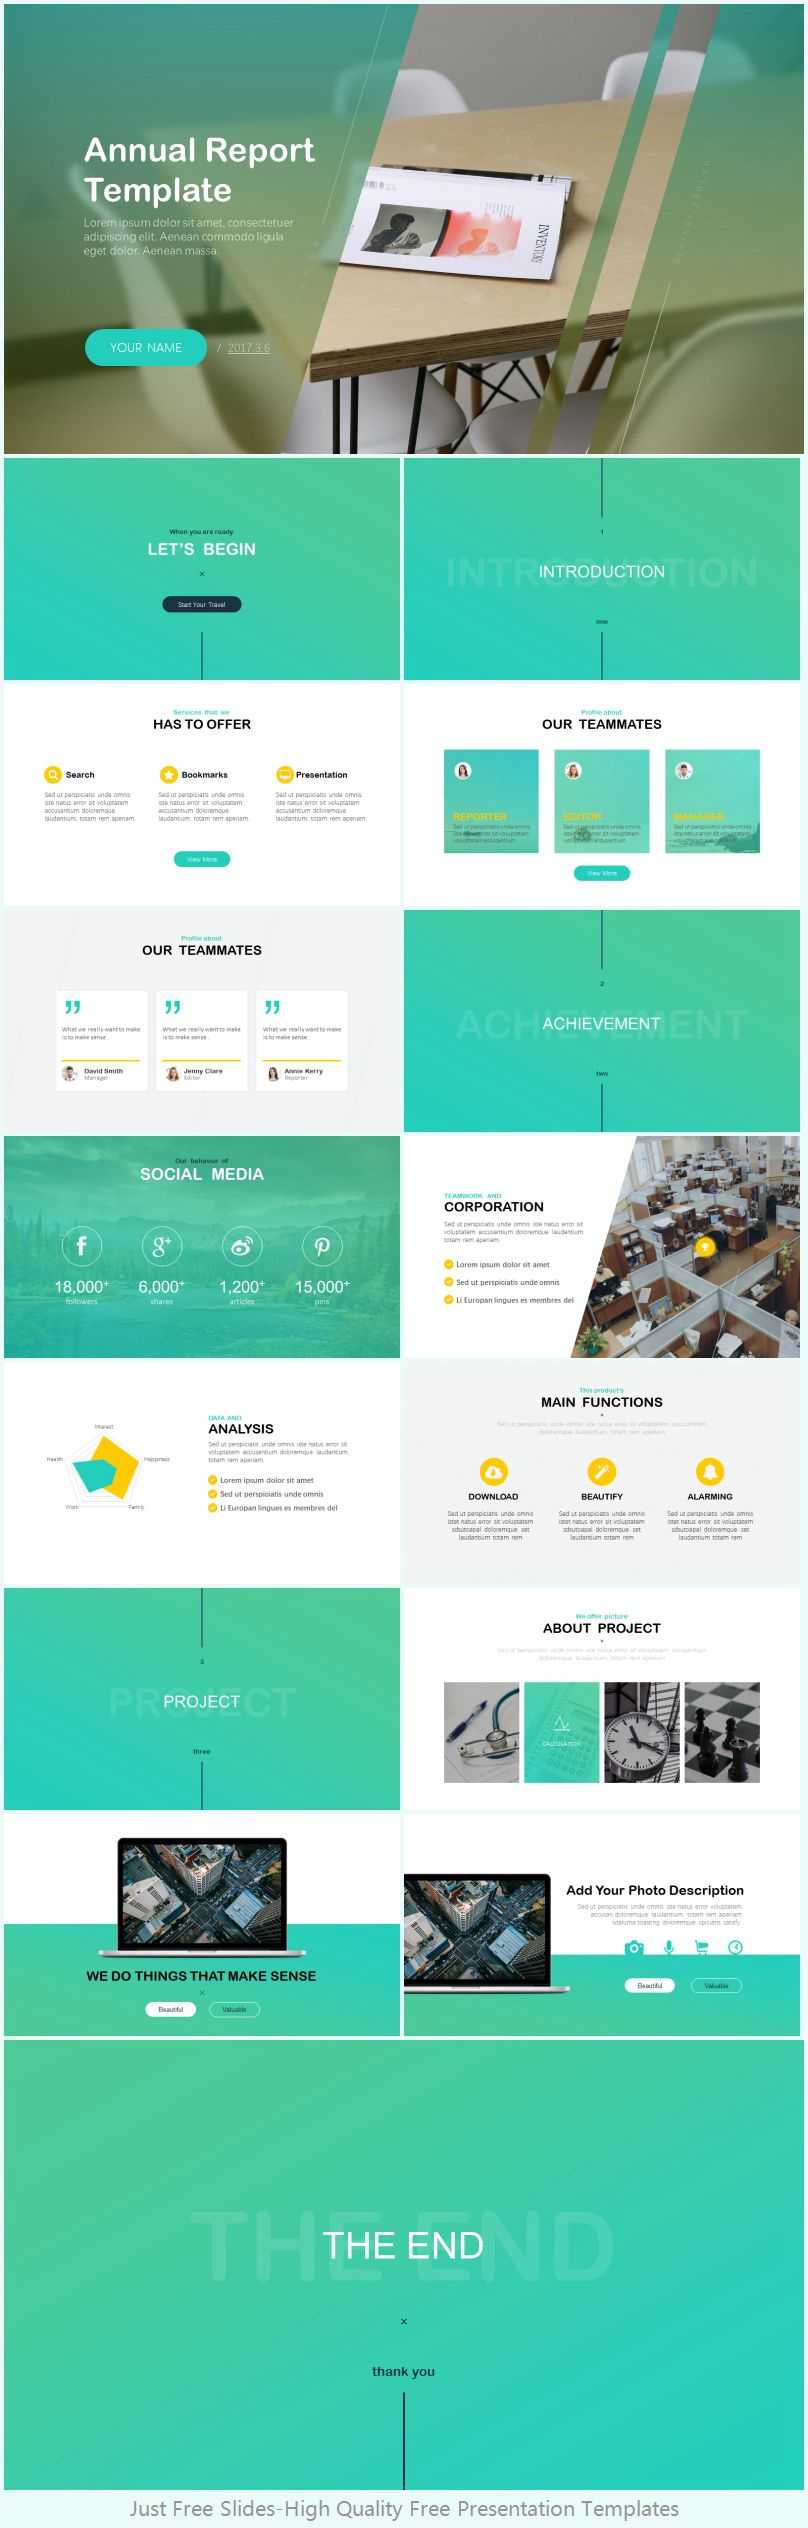 Annual Report Powerpoint Template – Just Free Slides Inside Annual Report Ppt Template